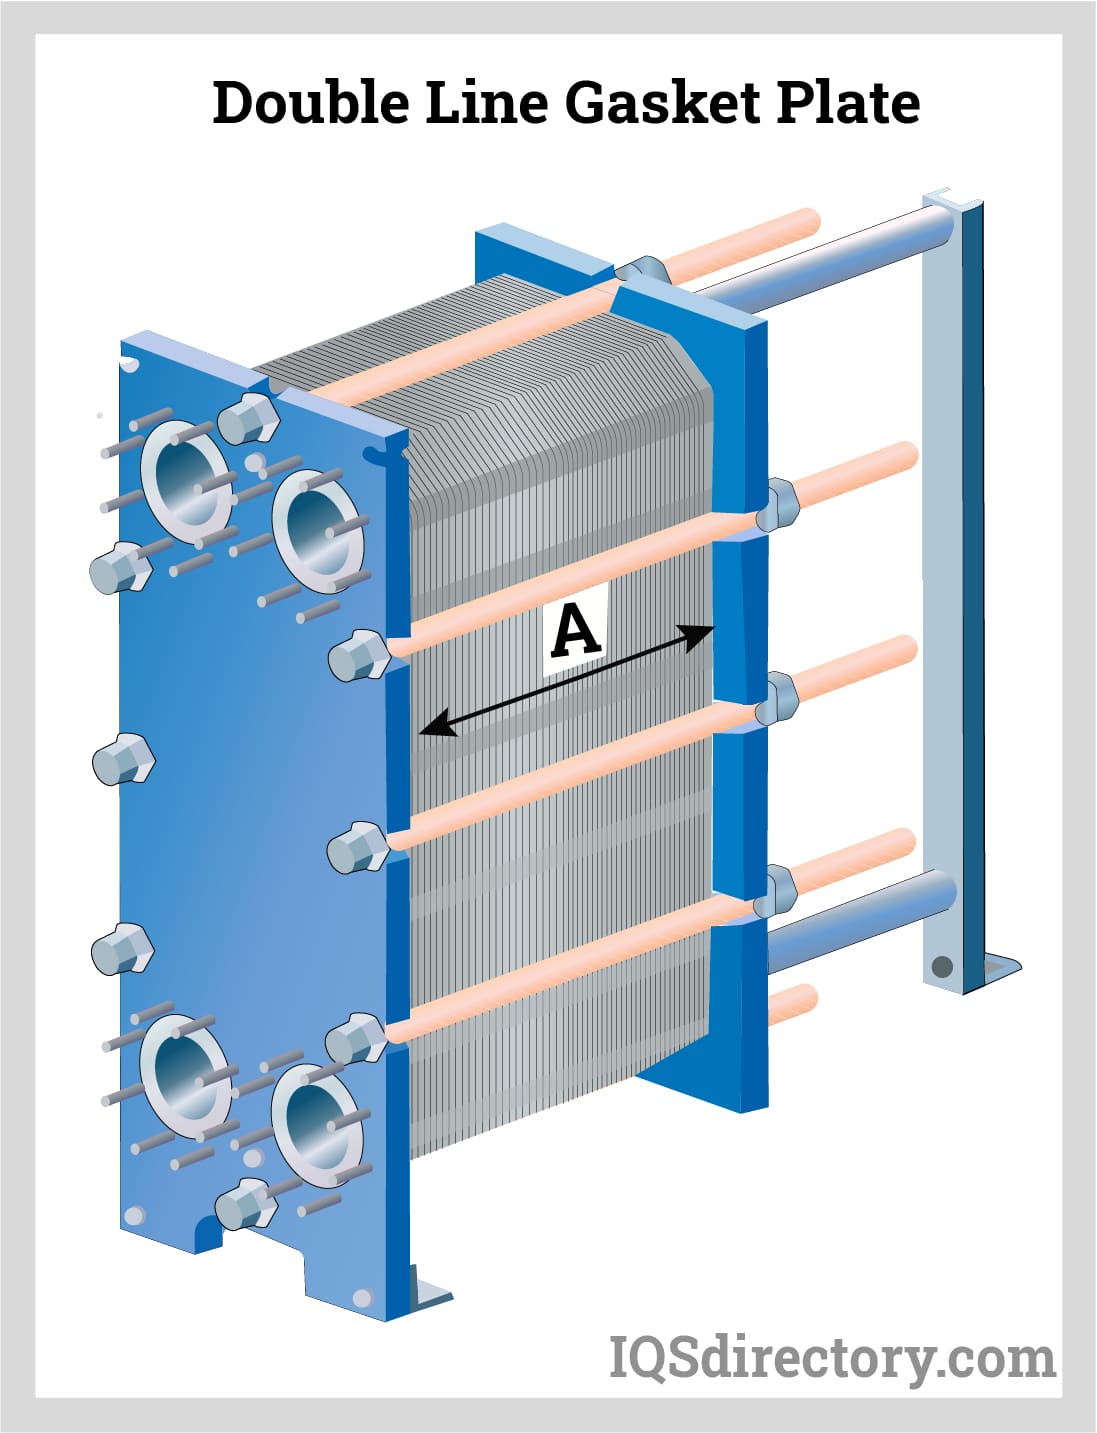 Plate Heat Exchangers: Components, Types, Applications and Advantages